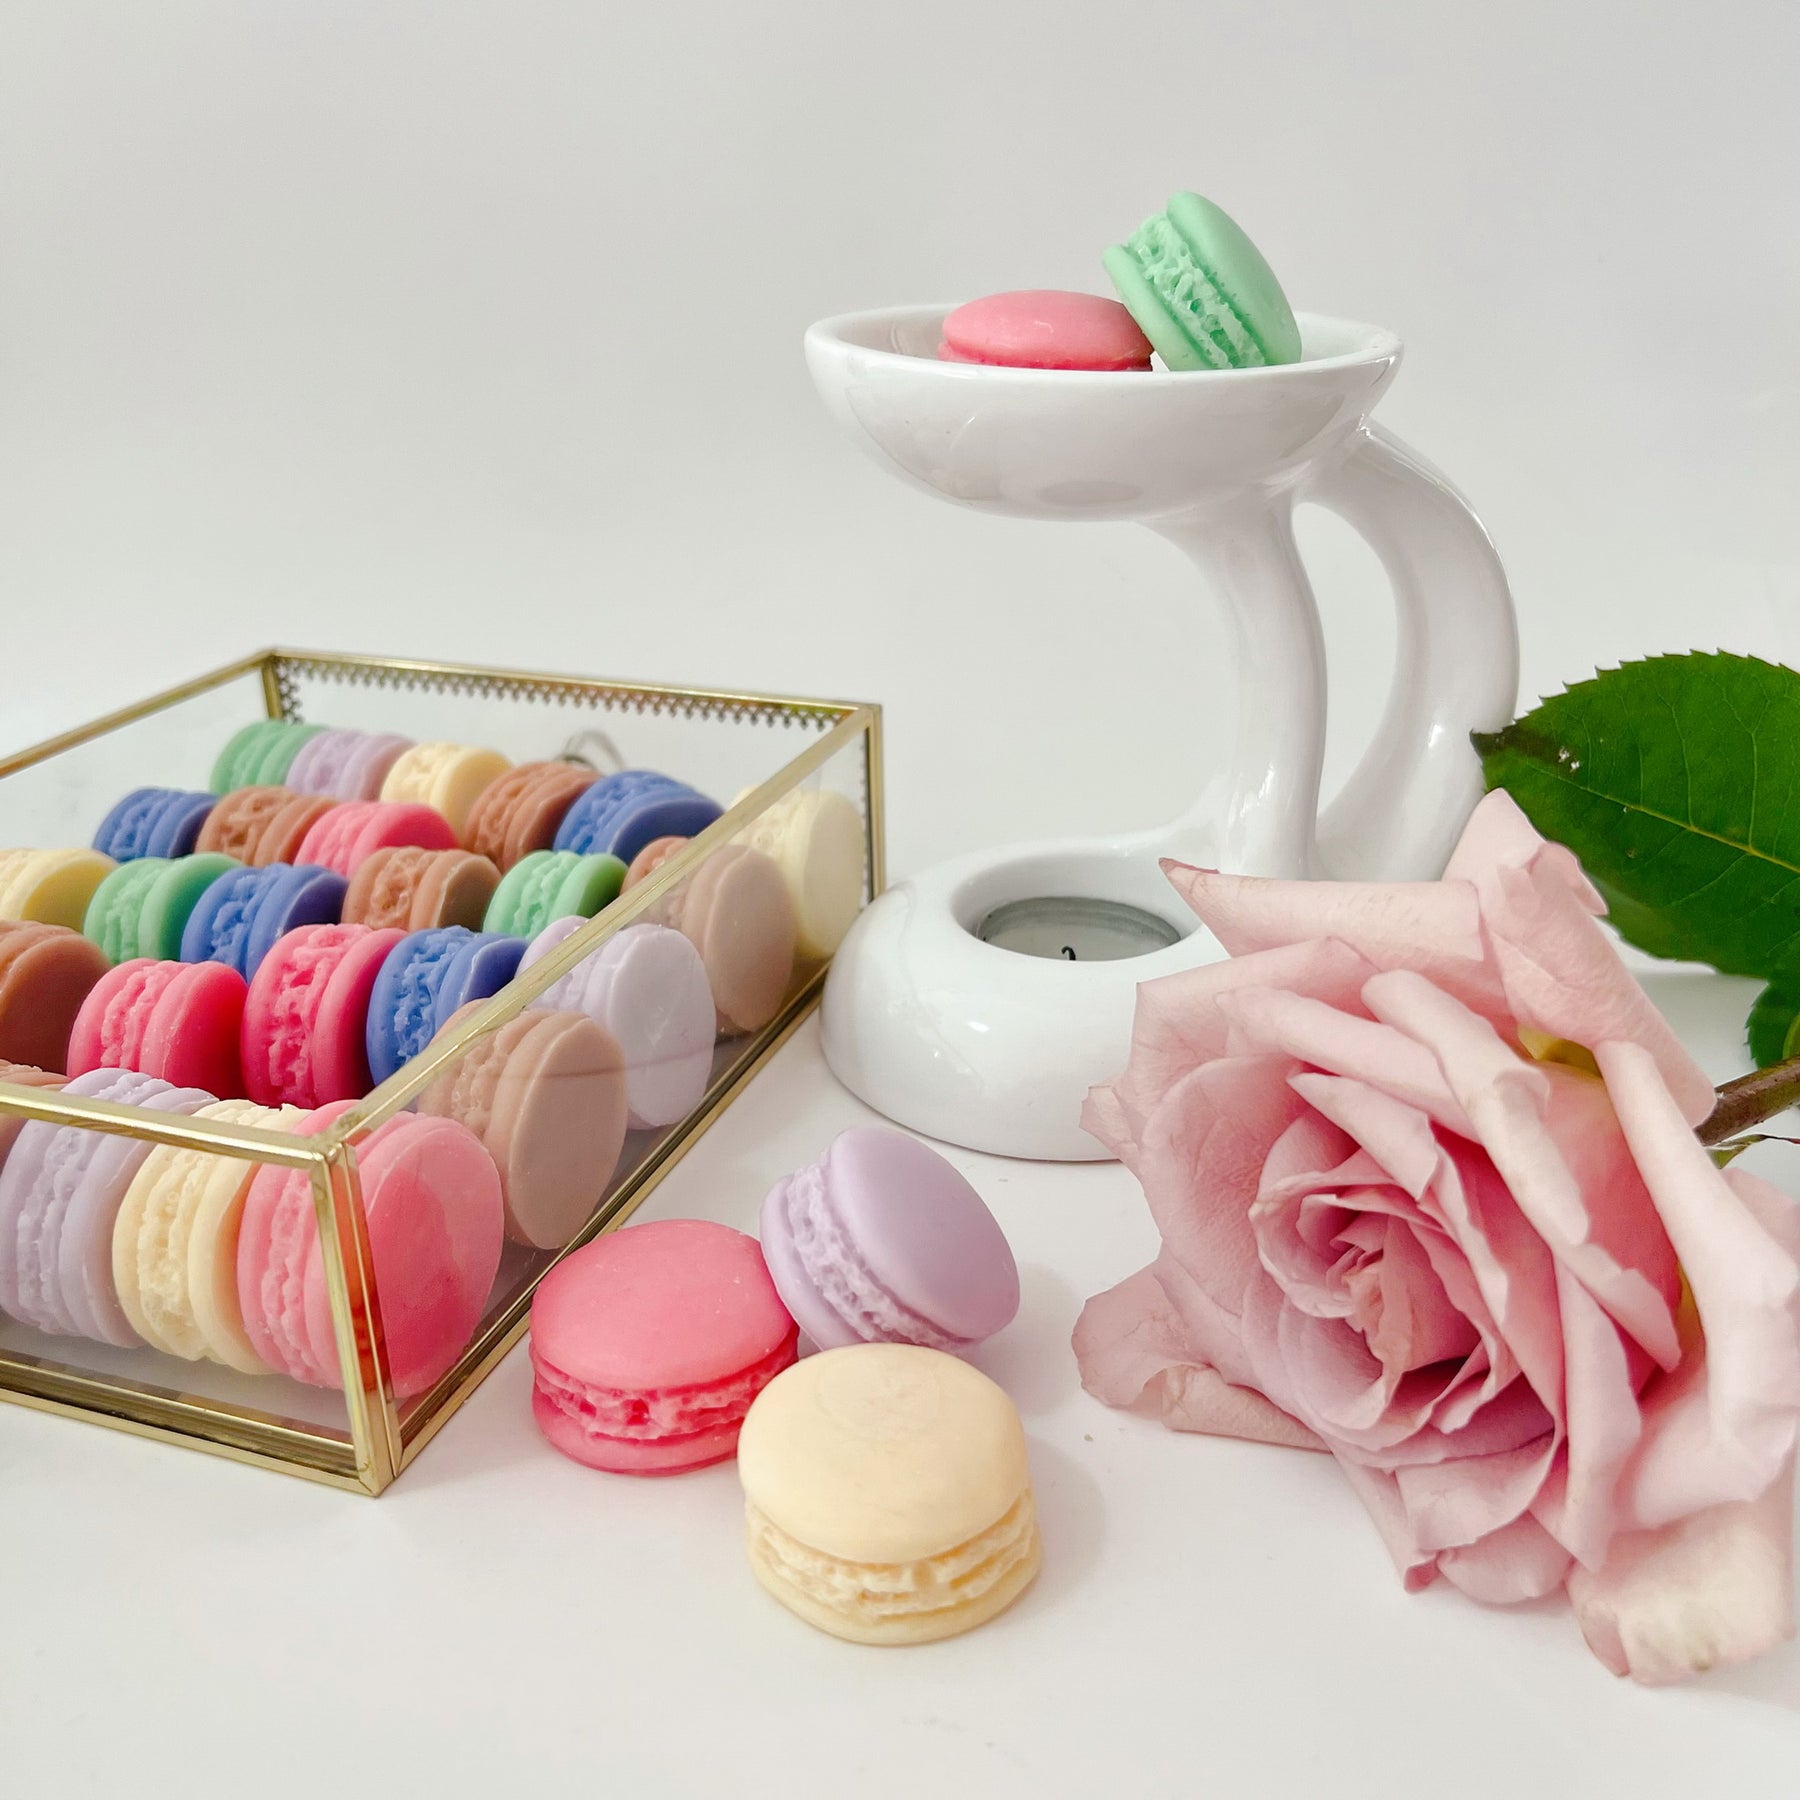 Six colorful macaron-shaped soy wax melts from LMJ Candles artistically arranged on ceramic warmer and cardboard box, showcasing eco-friendly and vegan features.